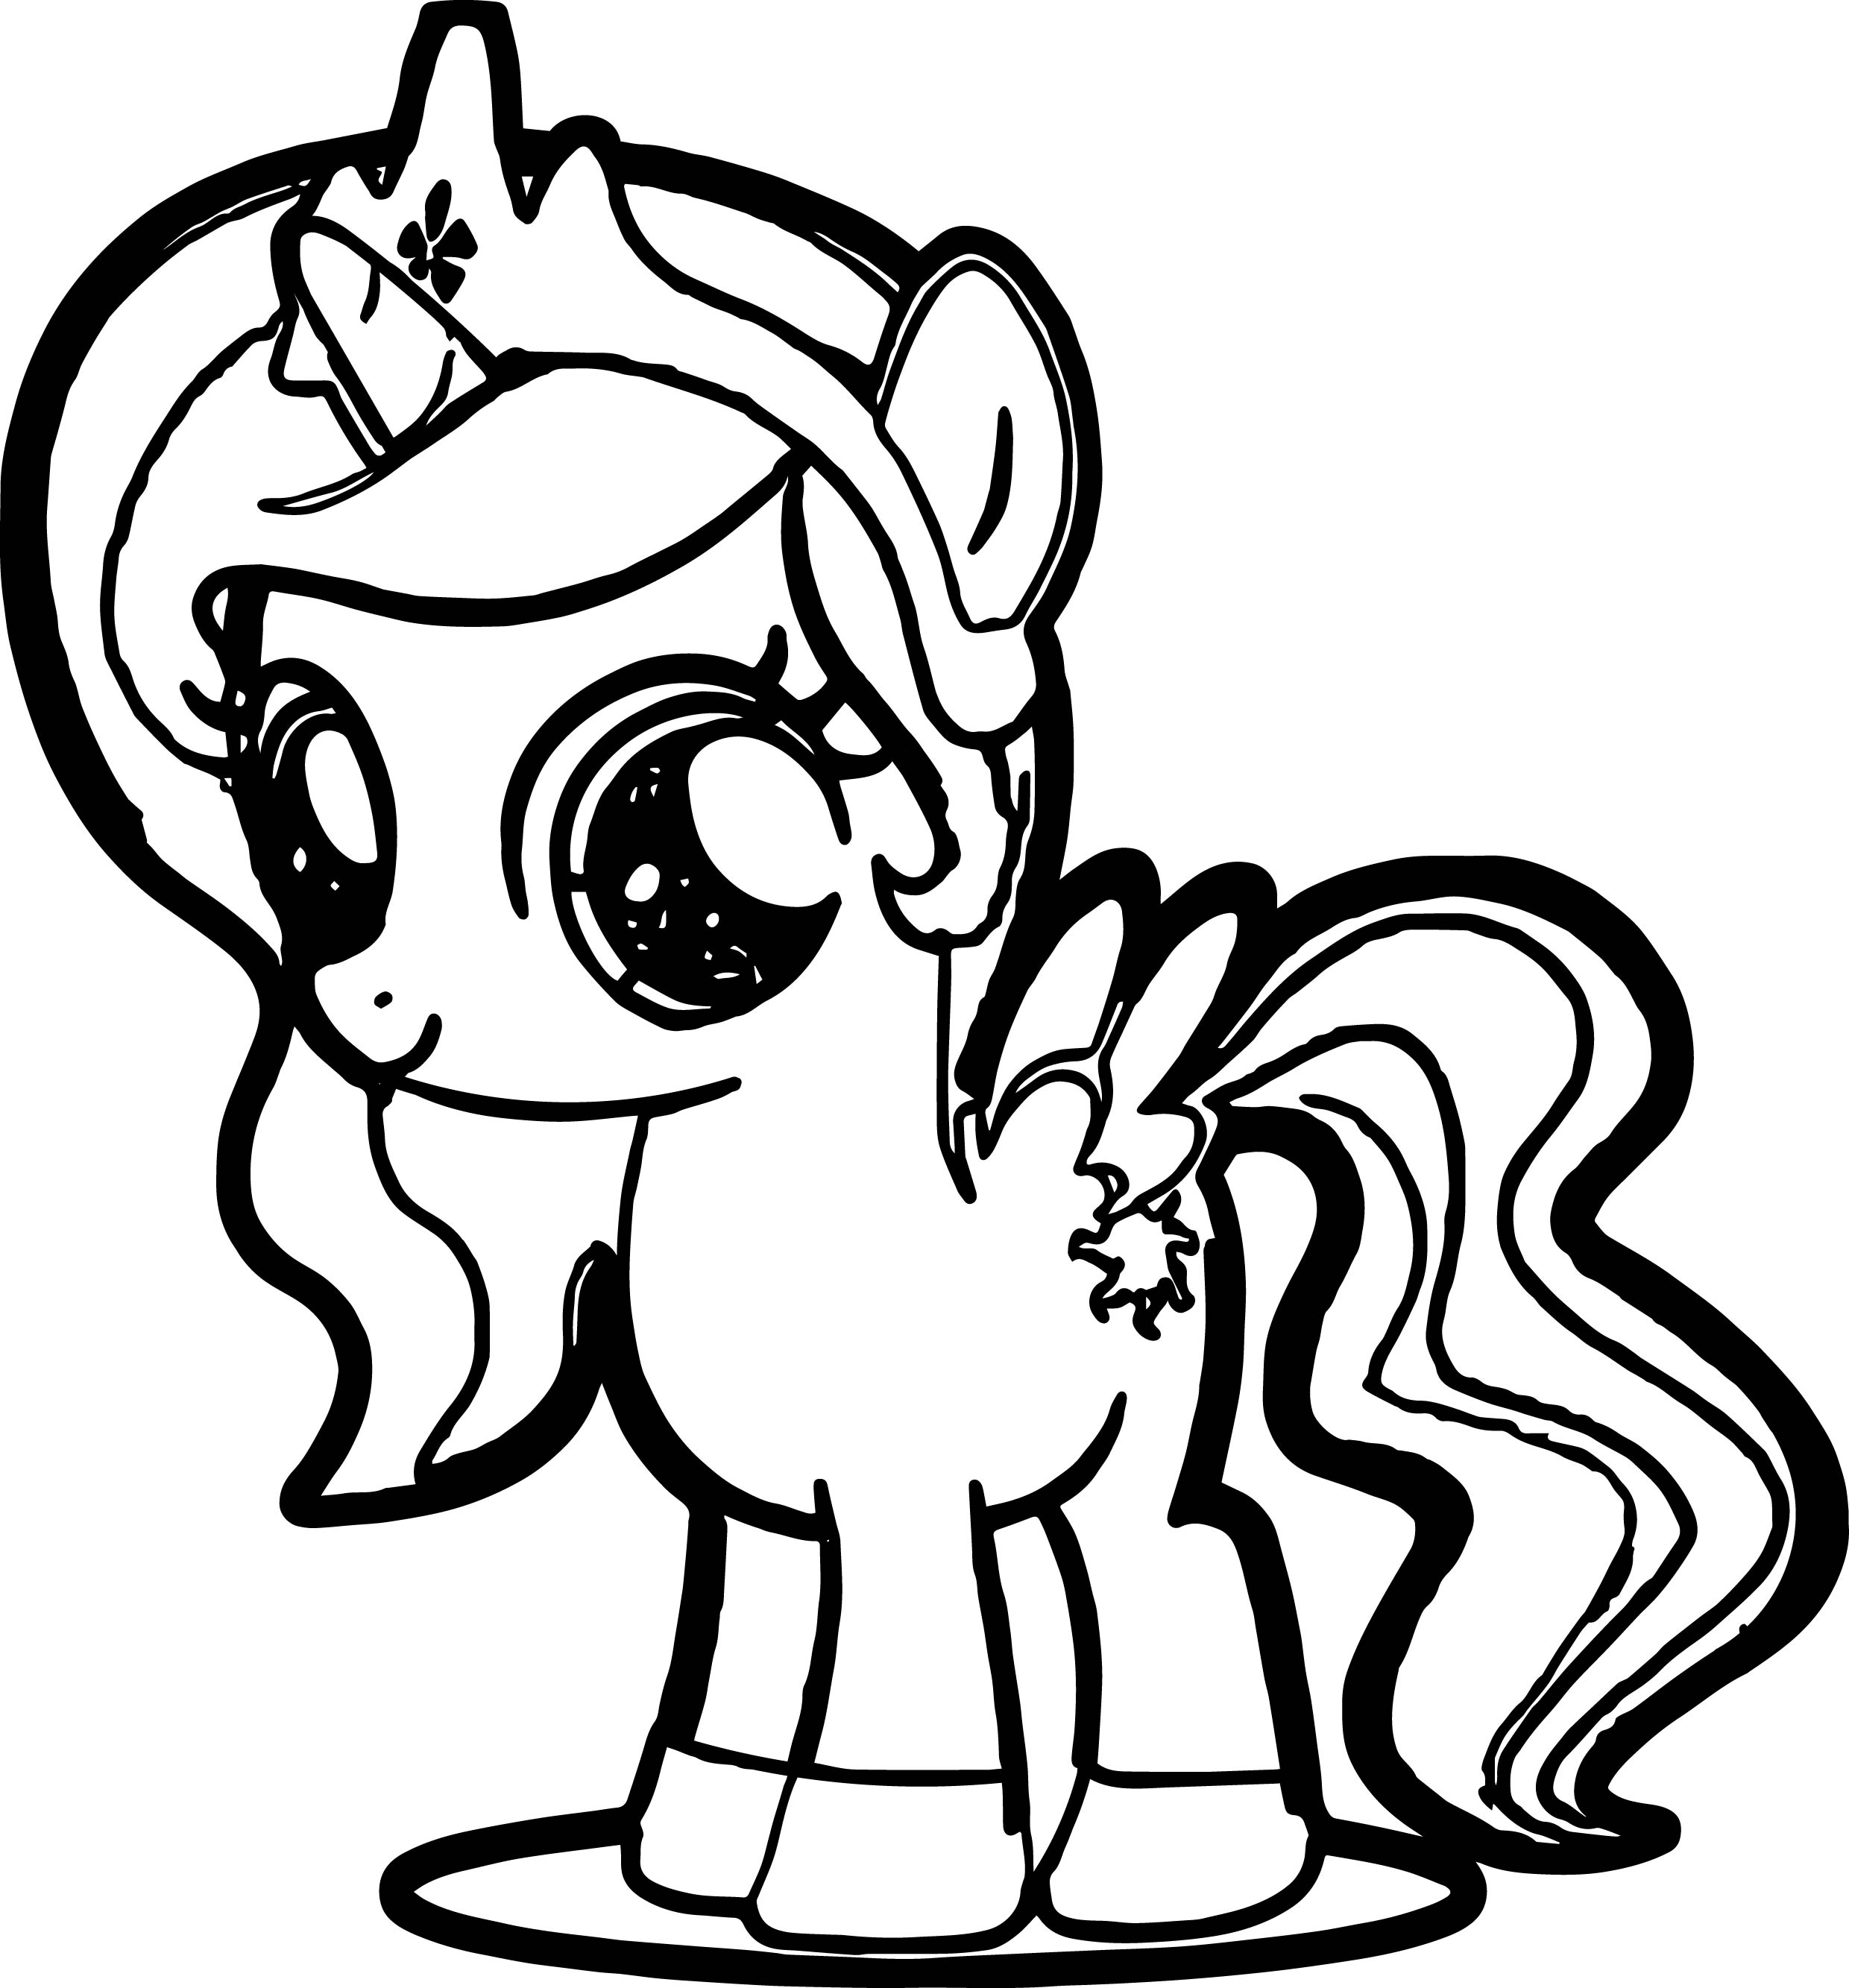 Little Pony Coloring Pages | Free download on ClipArtMag